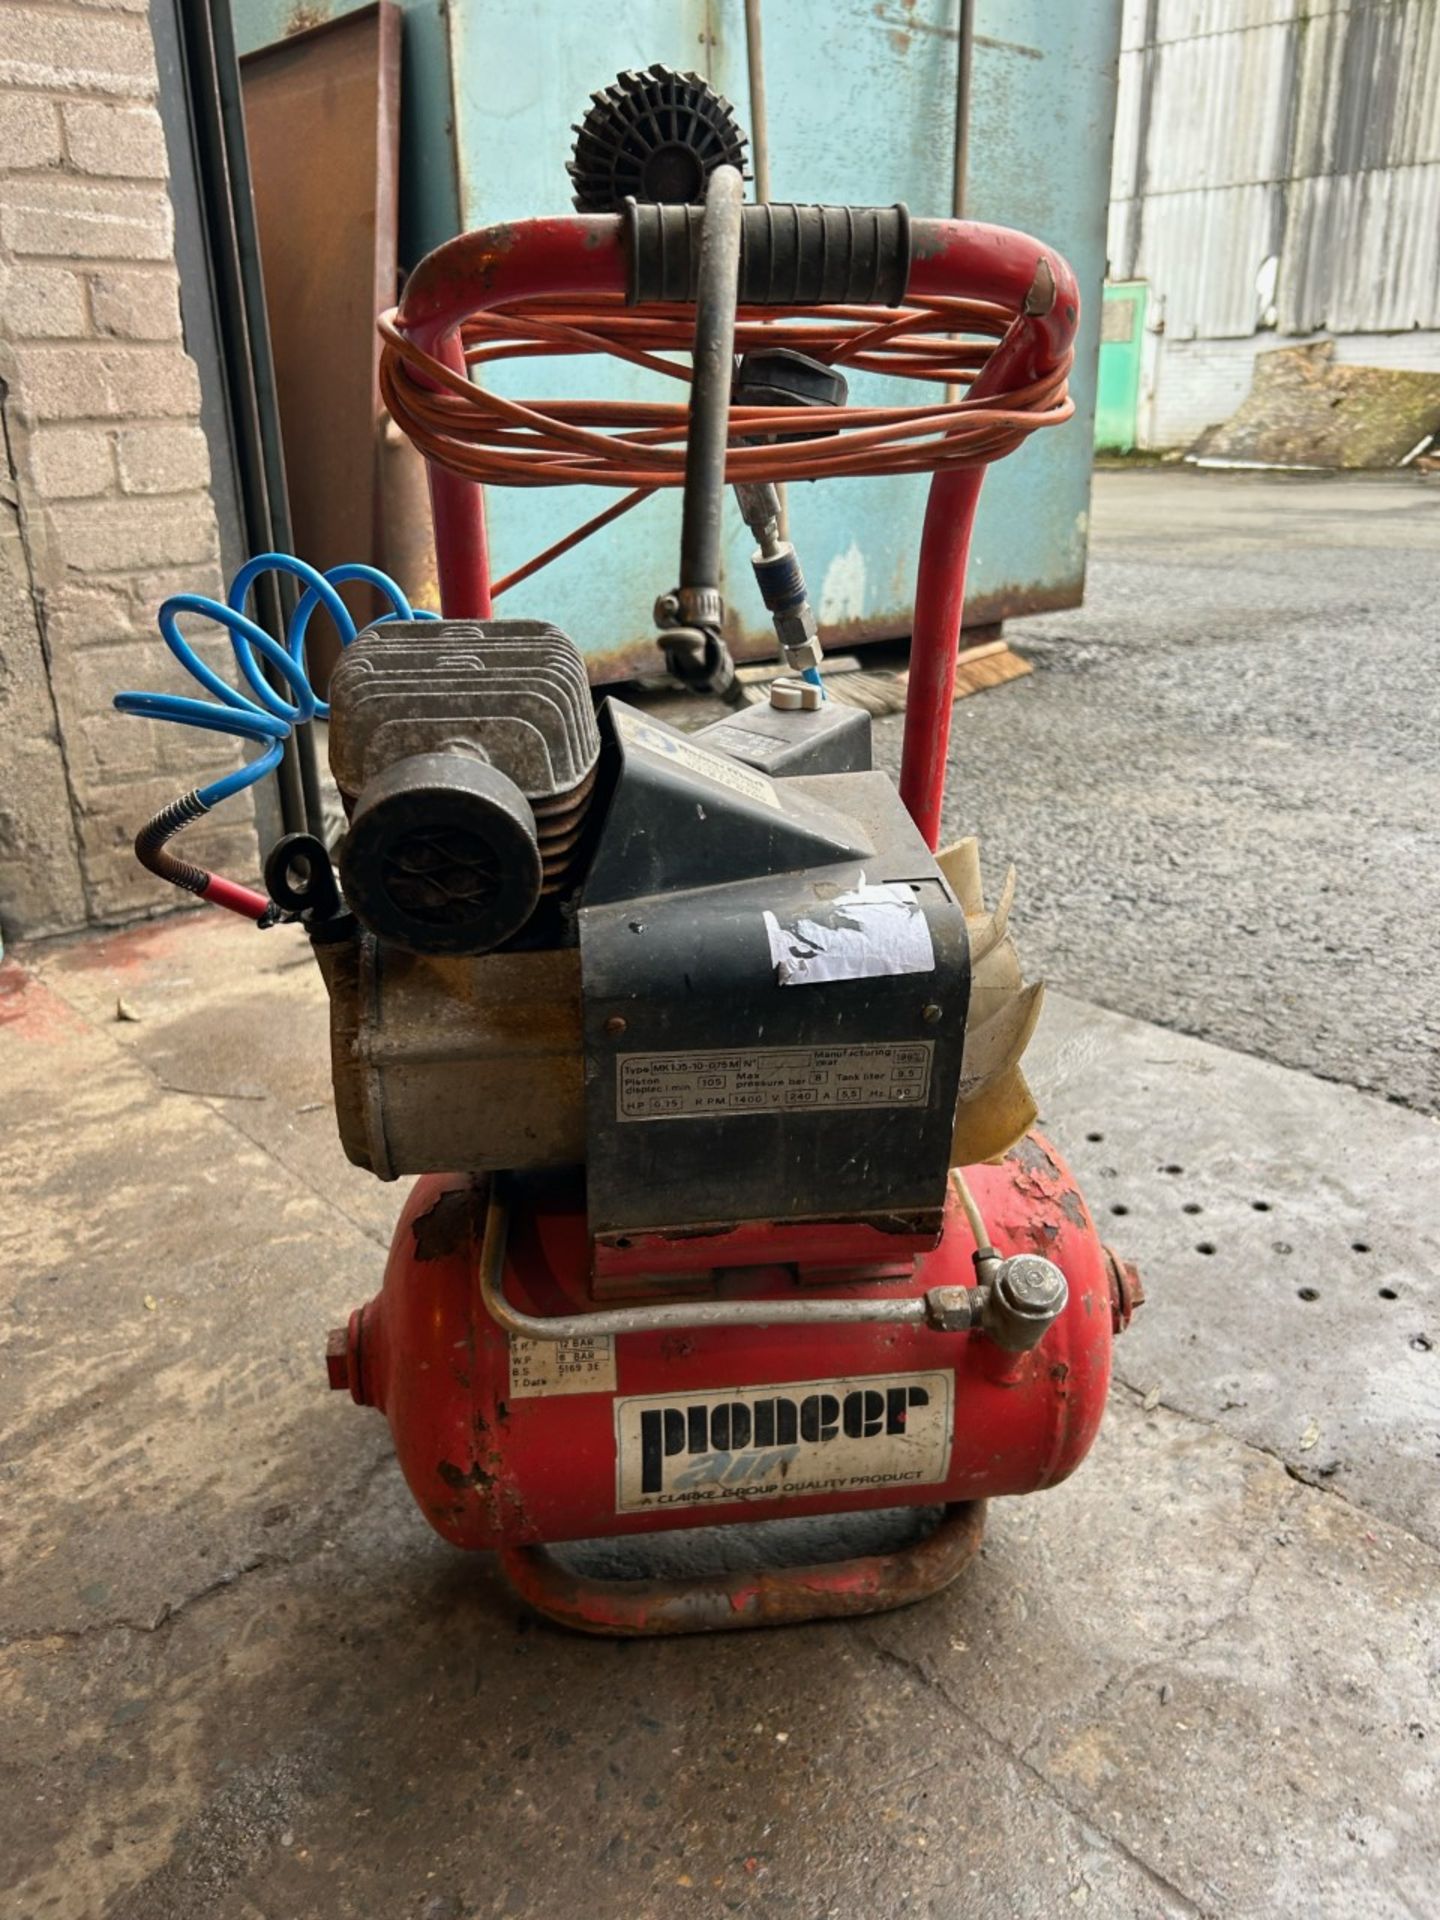 Clarke pioneer air air compressor small 10L tank. Does run and work but selling as spares or